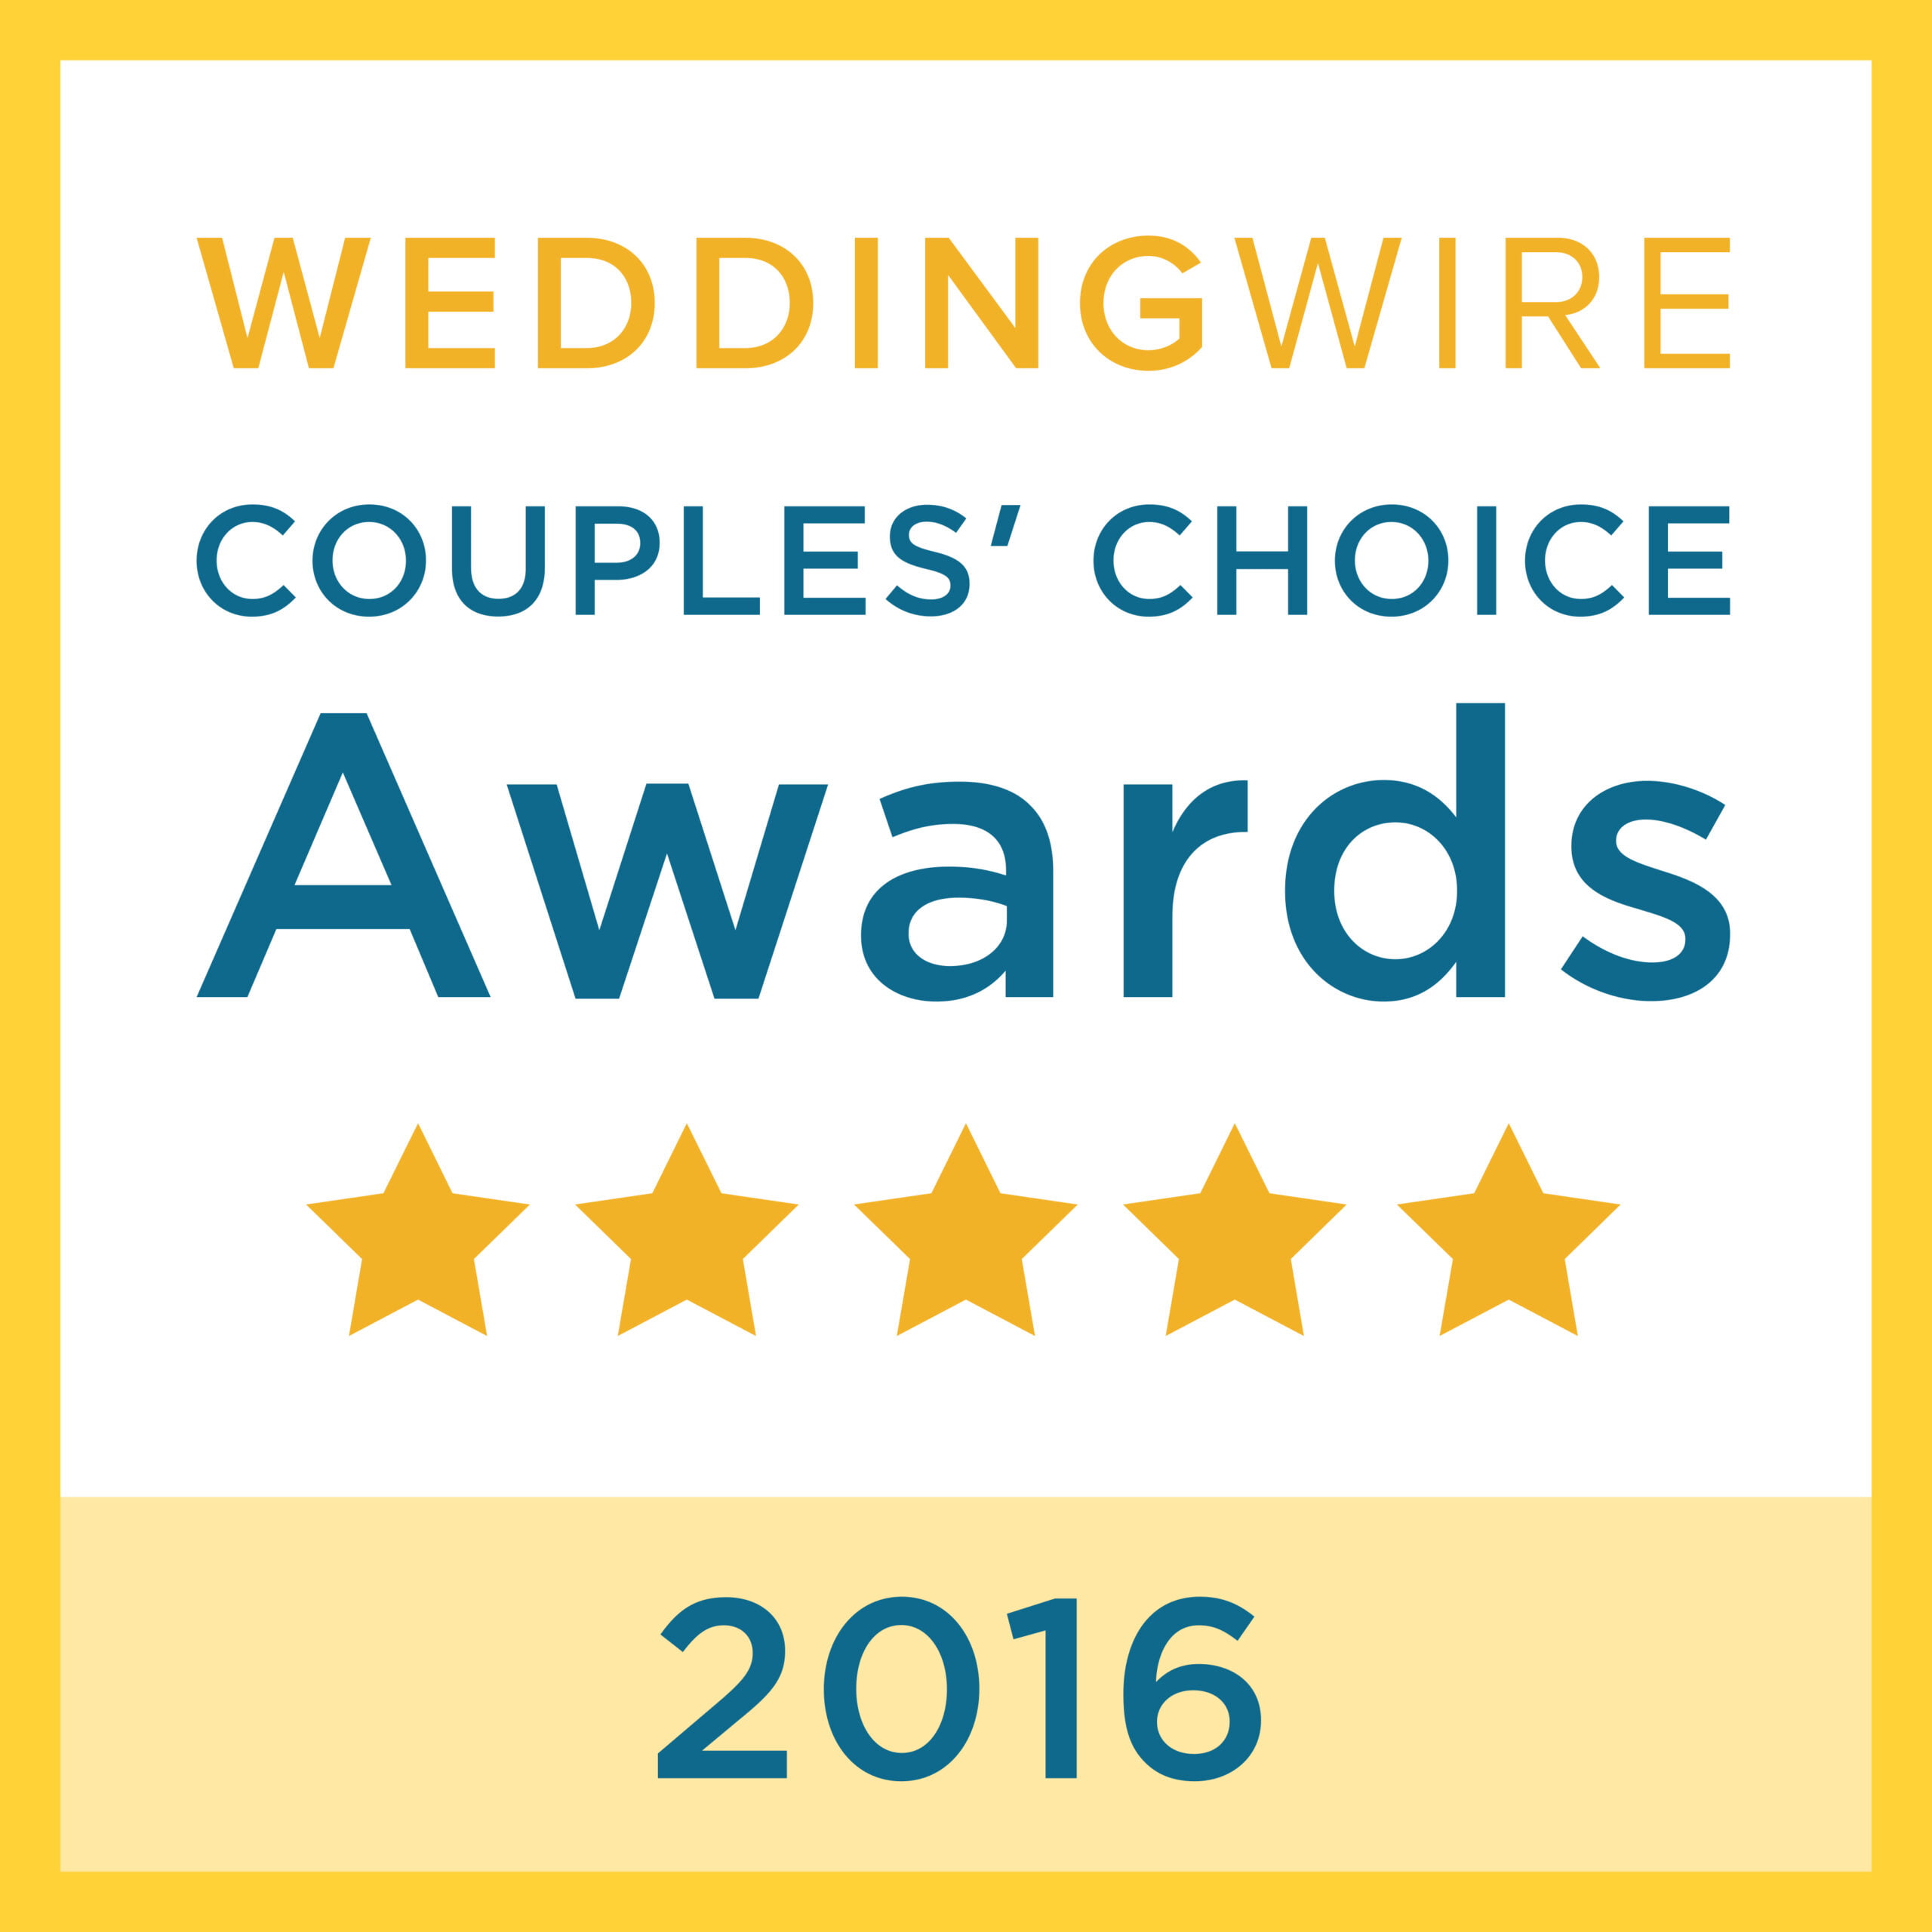 Weddingwire Couples' Choice Awards 2016 recognized the top-rated DJ services in DC.